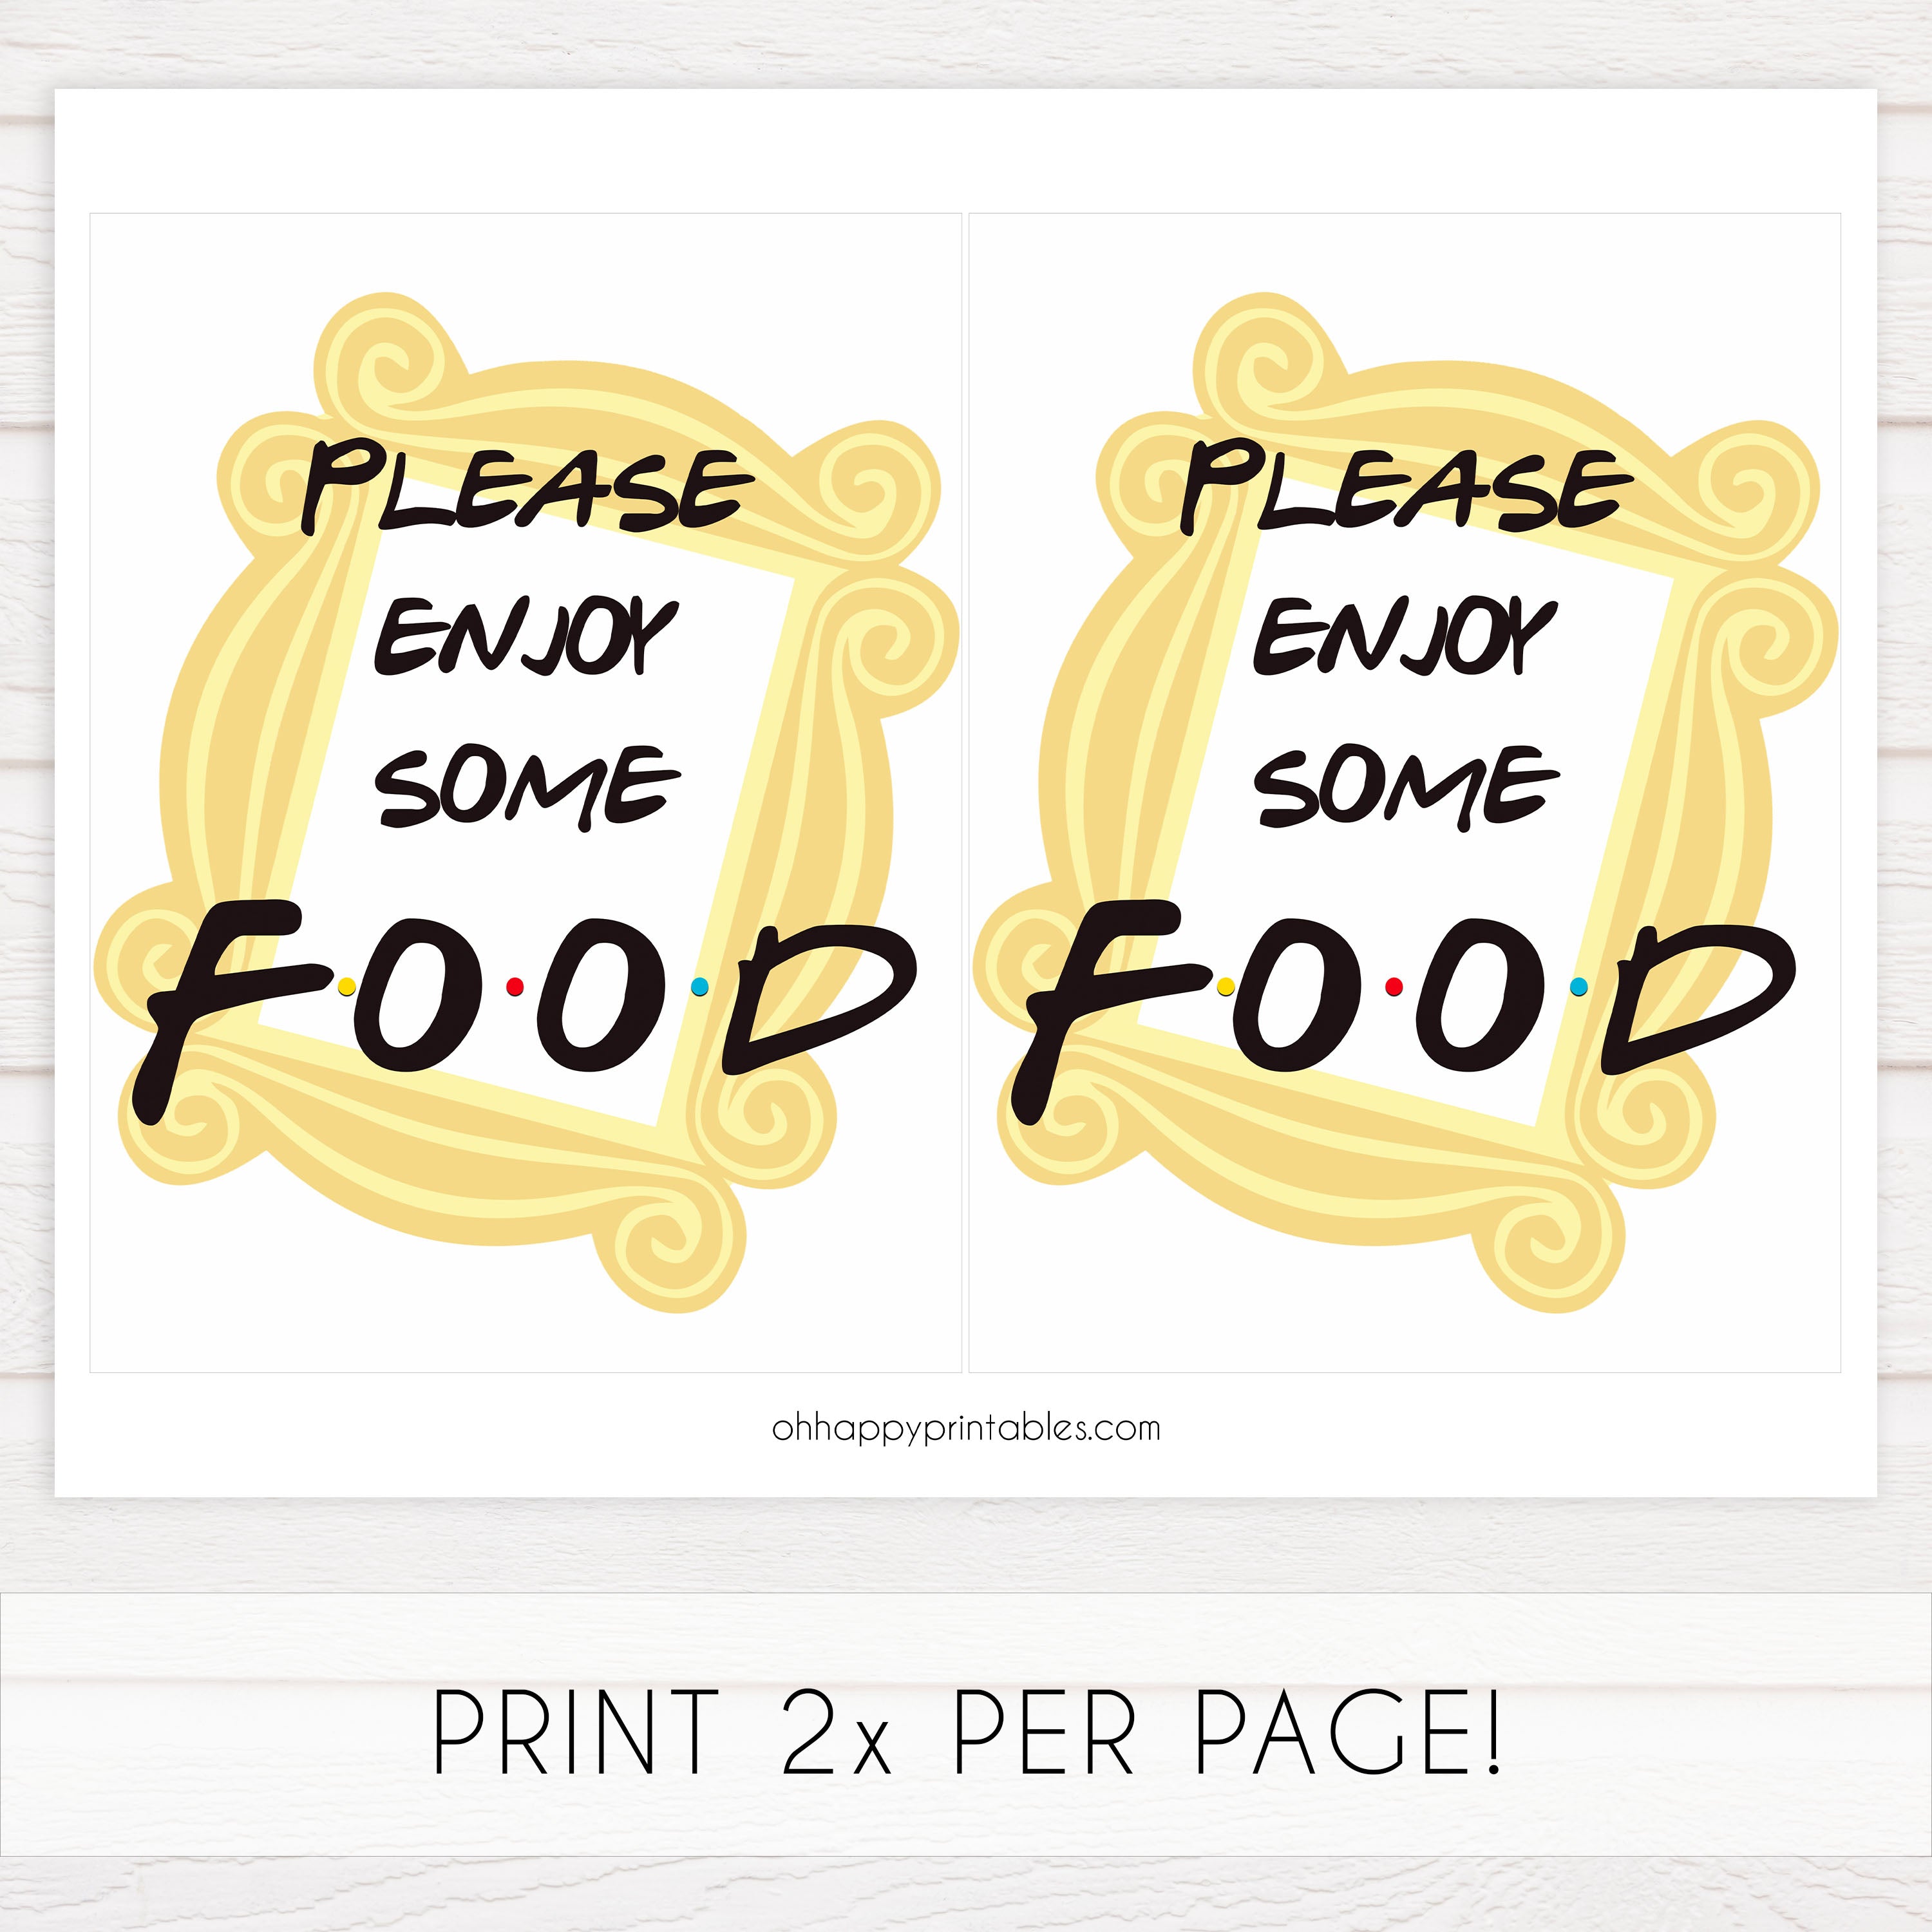 food baby table signs, food baby signs, Friends baby decor, printable baby table signs, printable baby decor, friends table signs, fun baby signs, friends fun baby table signs